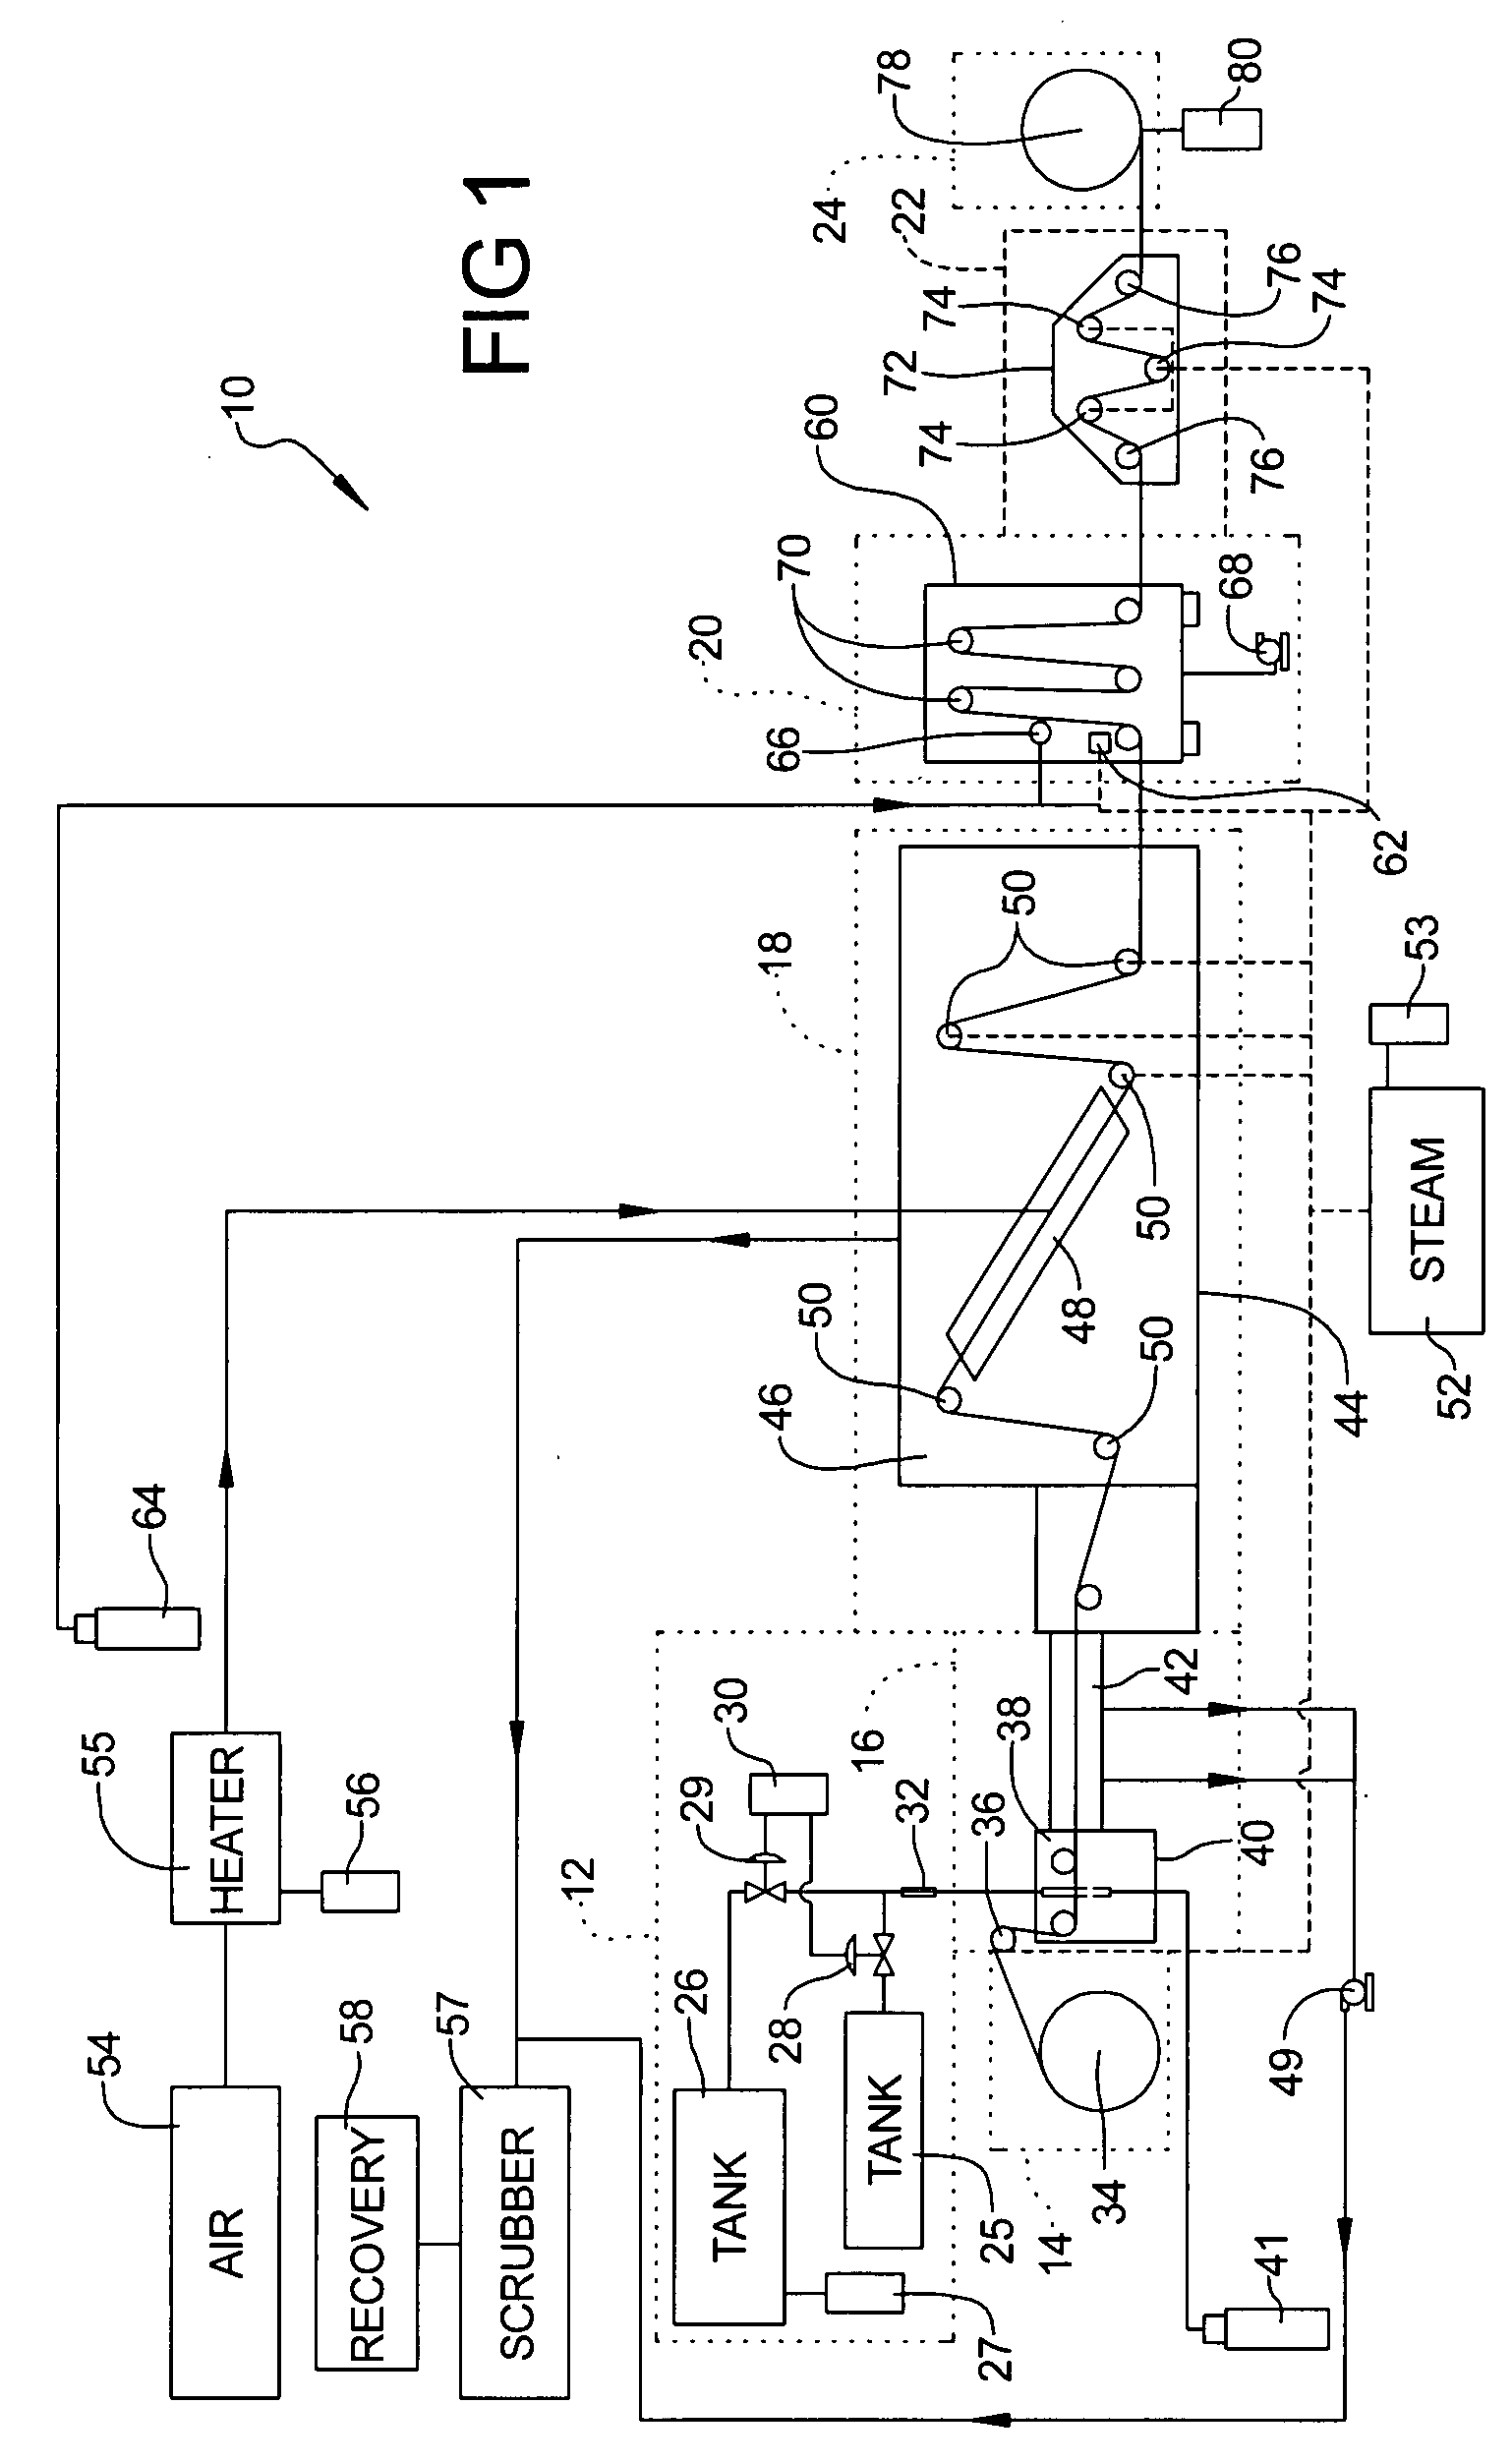 Apparatus and method for treating materials with compositions